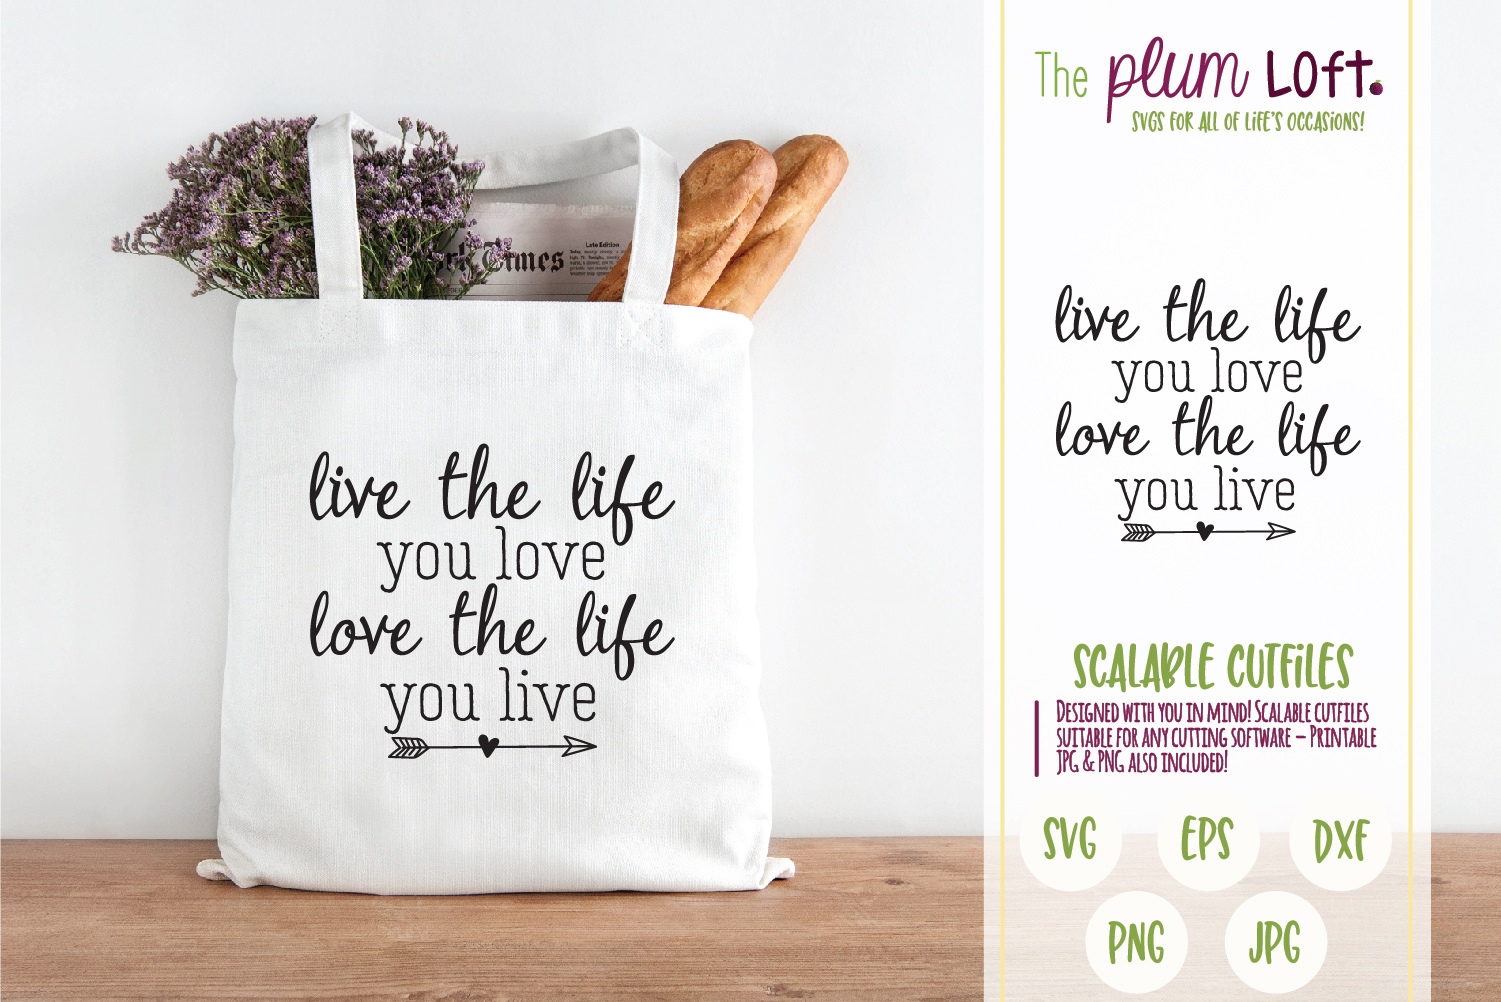 Live the life you love, love the life you live - SVG design